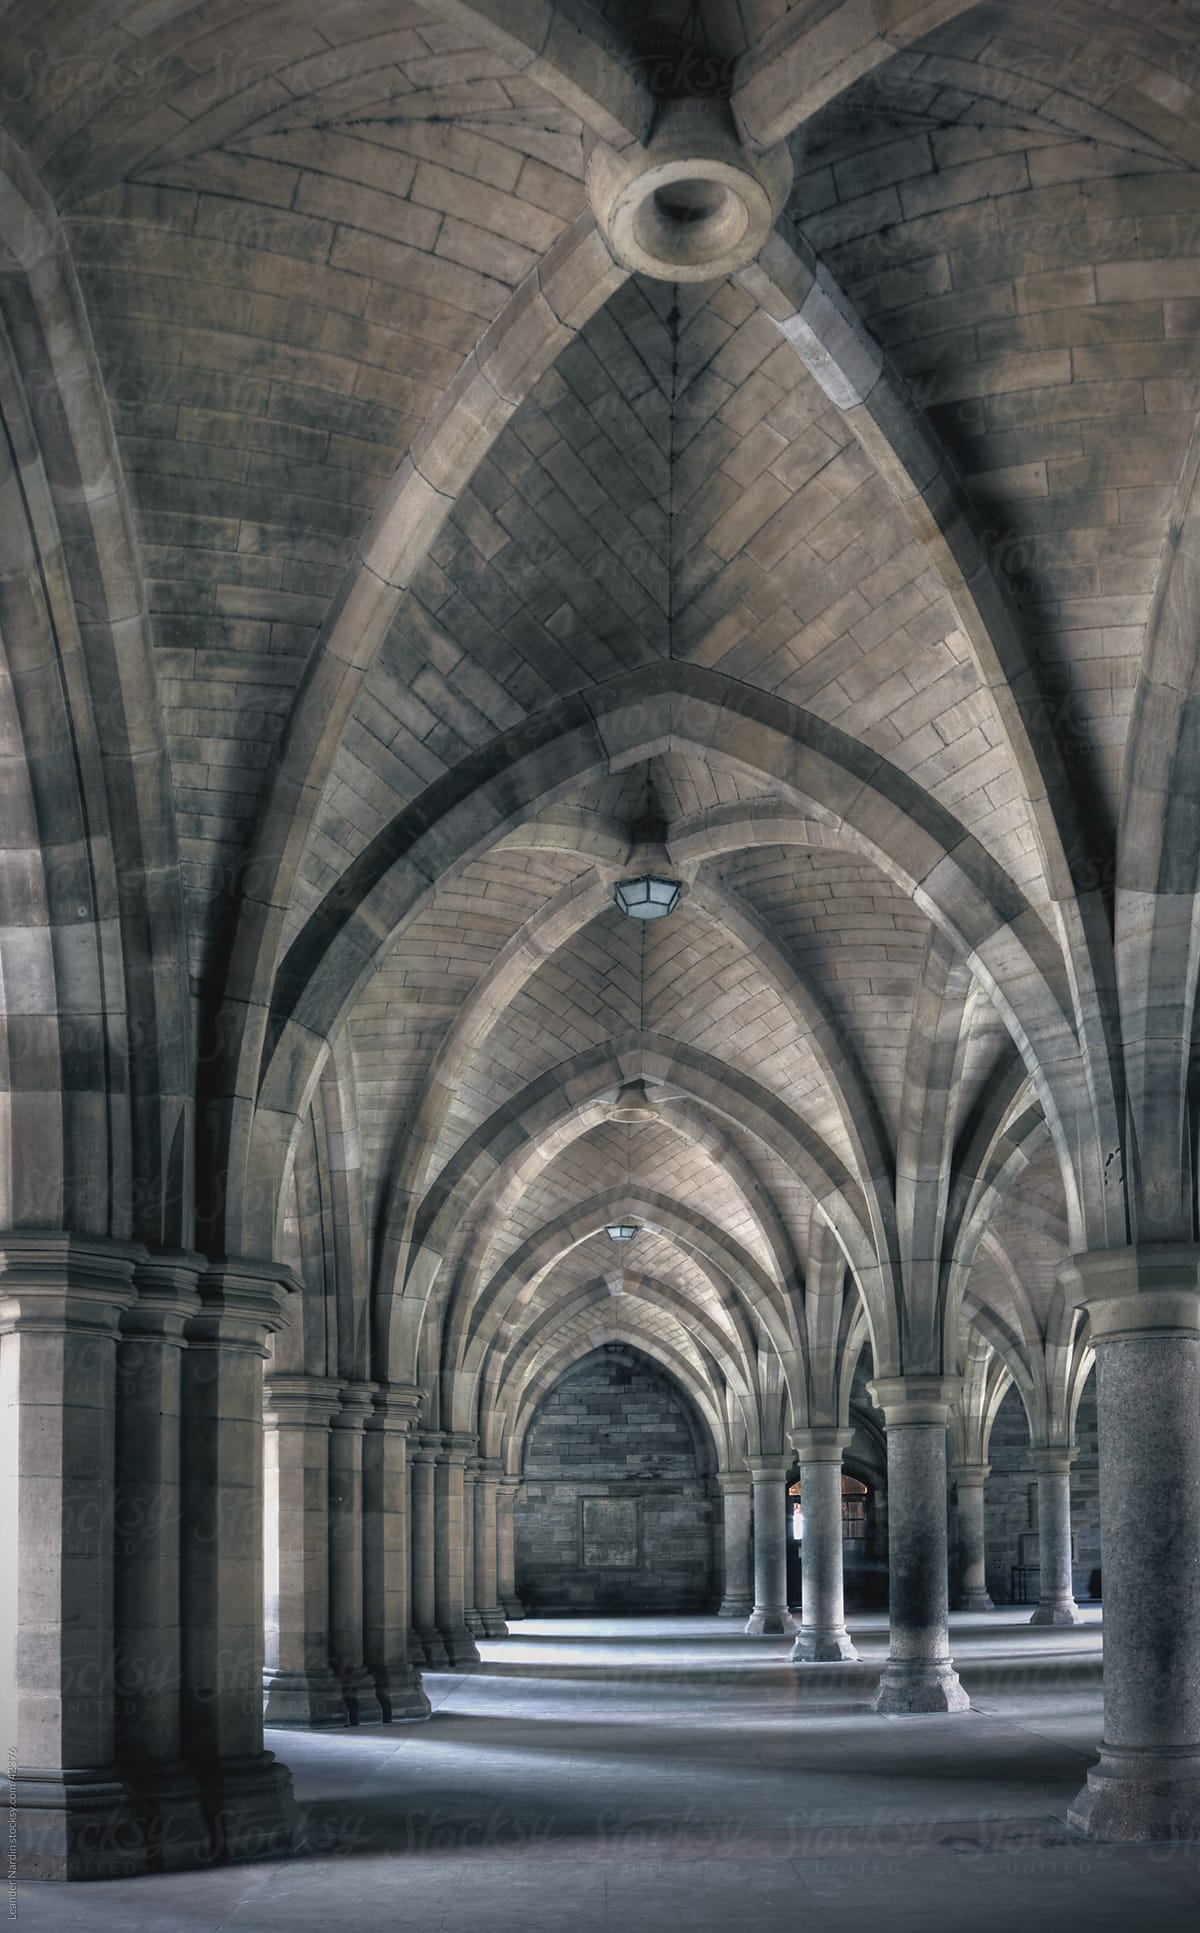 Gothic Arches below the Bute Hall of the Glasgow University